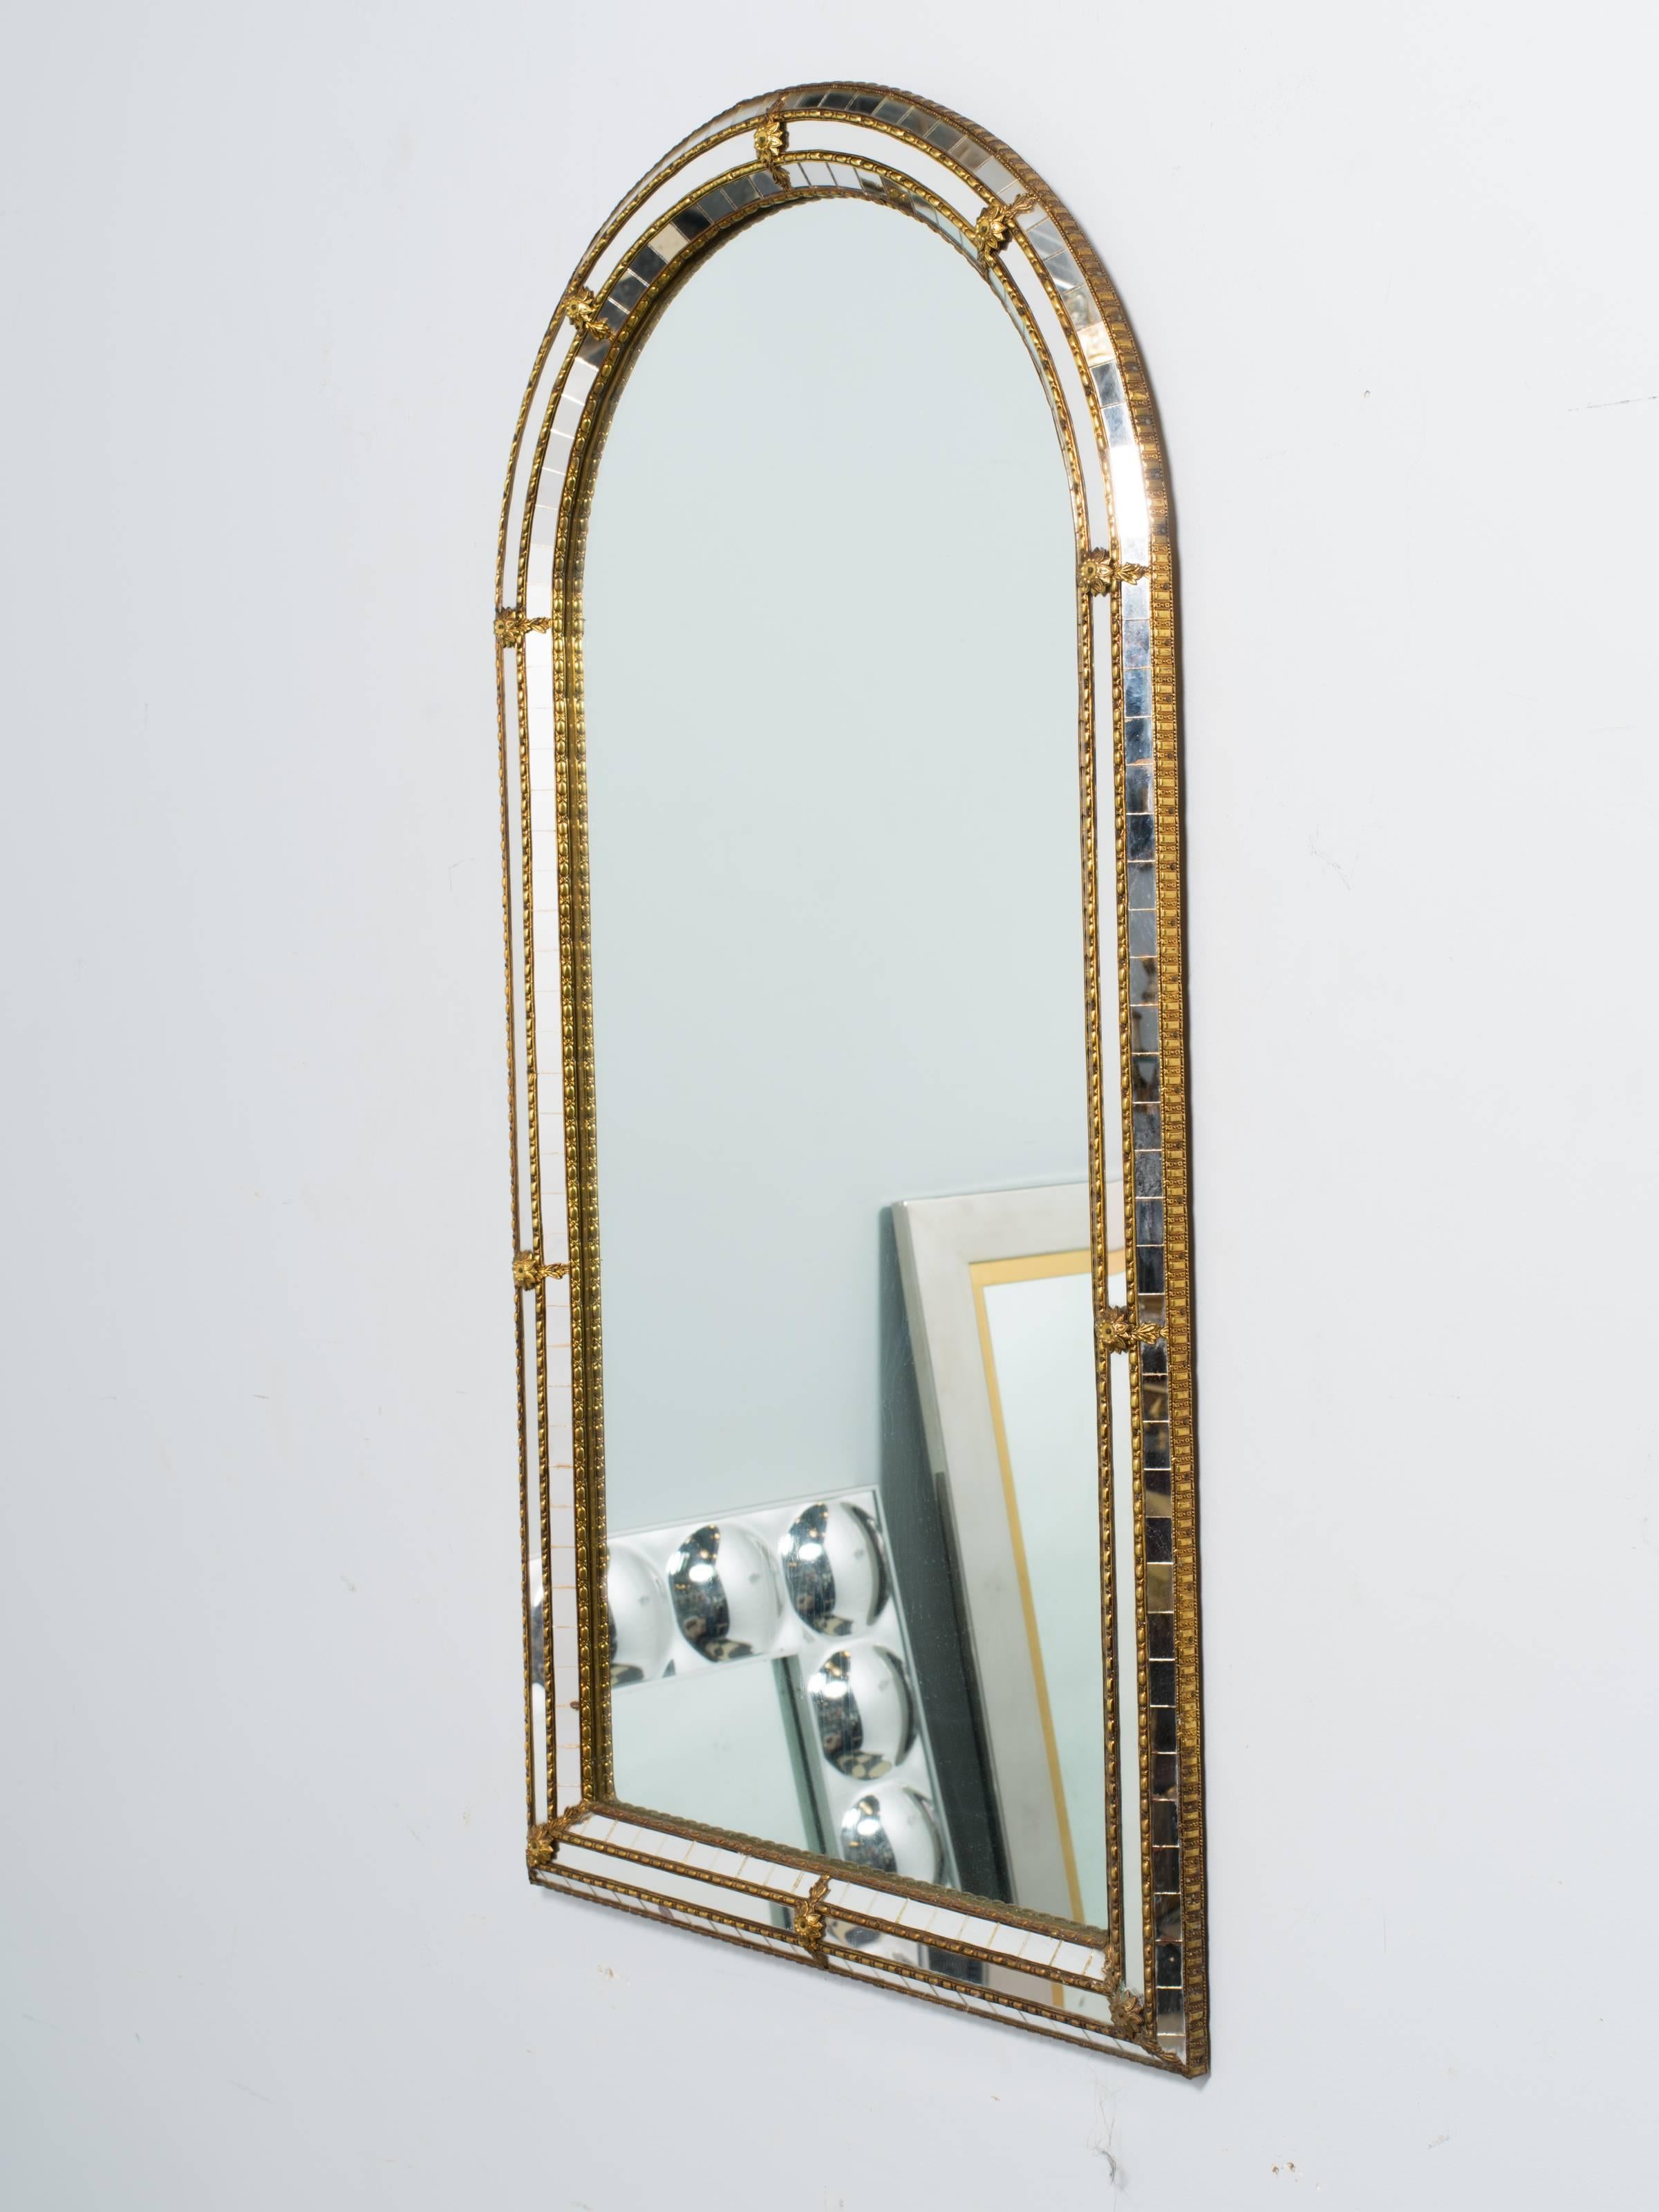 Italian mosaic wall mirror with brass accents.